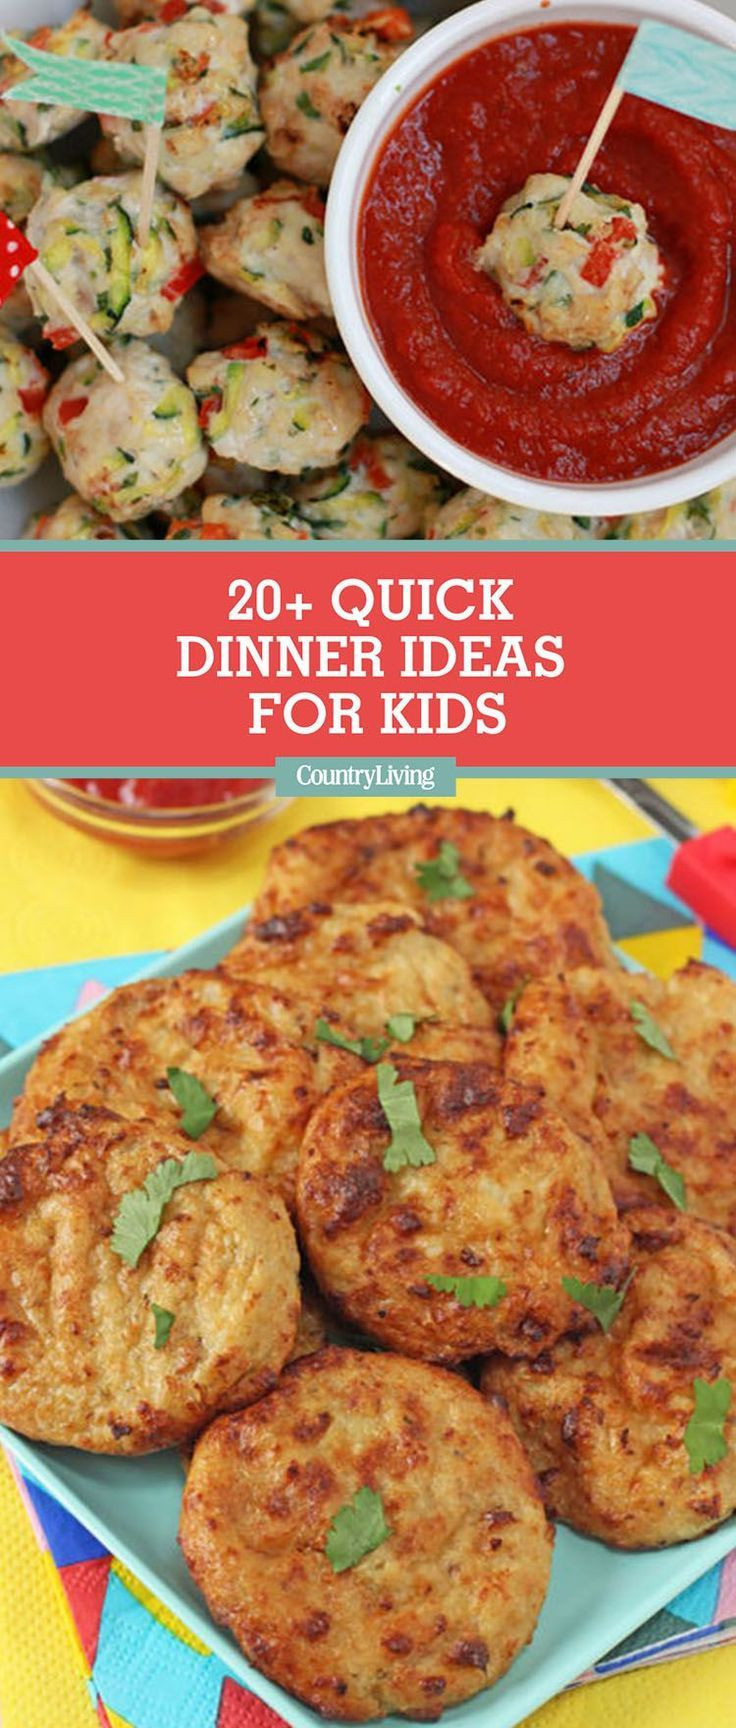 Kid Friendly Dinners For Picky Eaters
 Please Your Picky Eaters With These Delicious Family